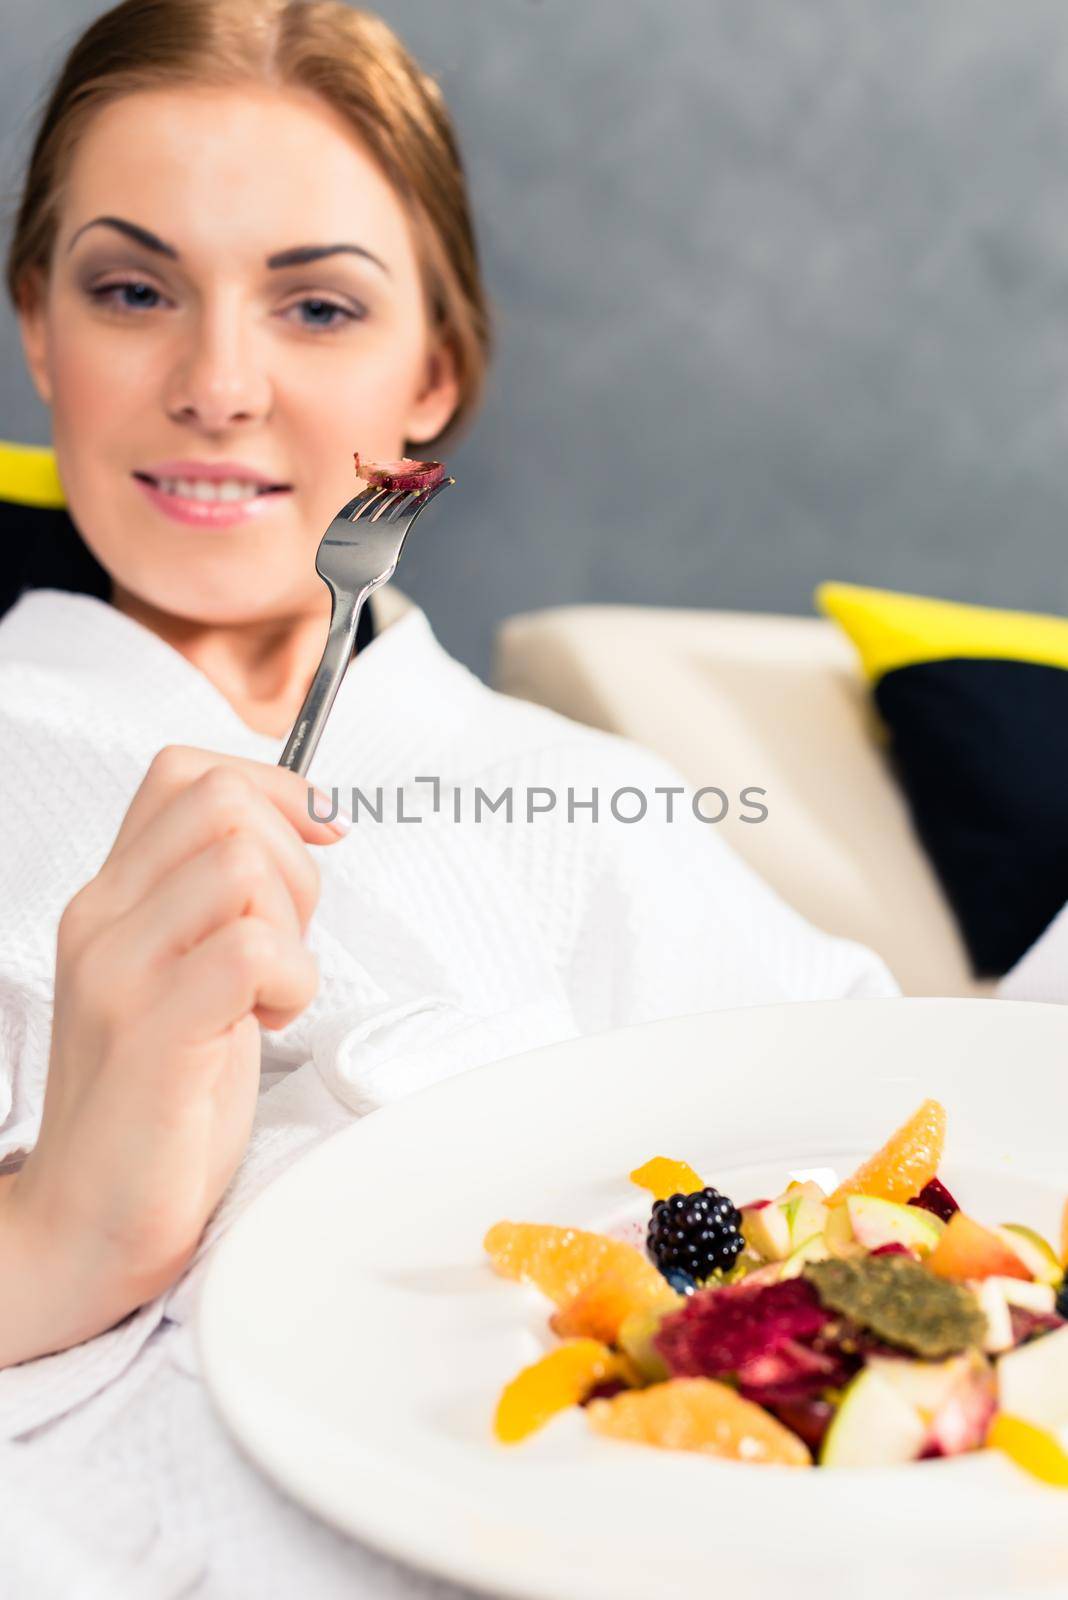 Portrait of a smiling woman eating healthy food